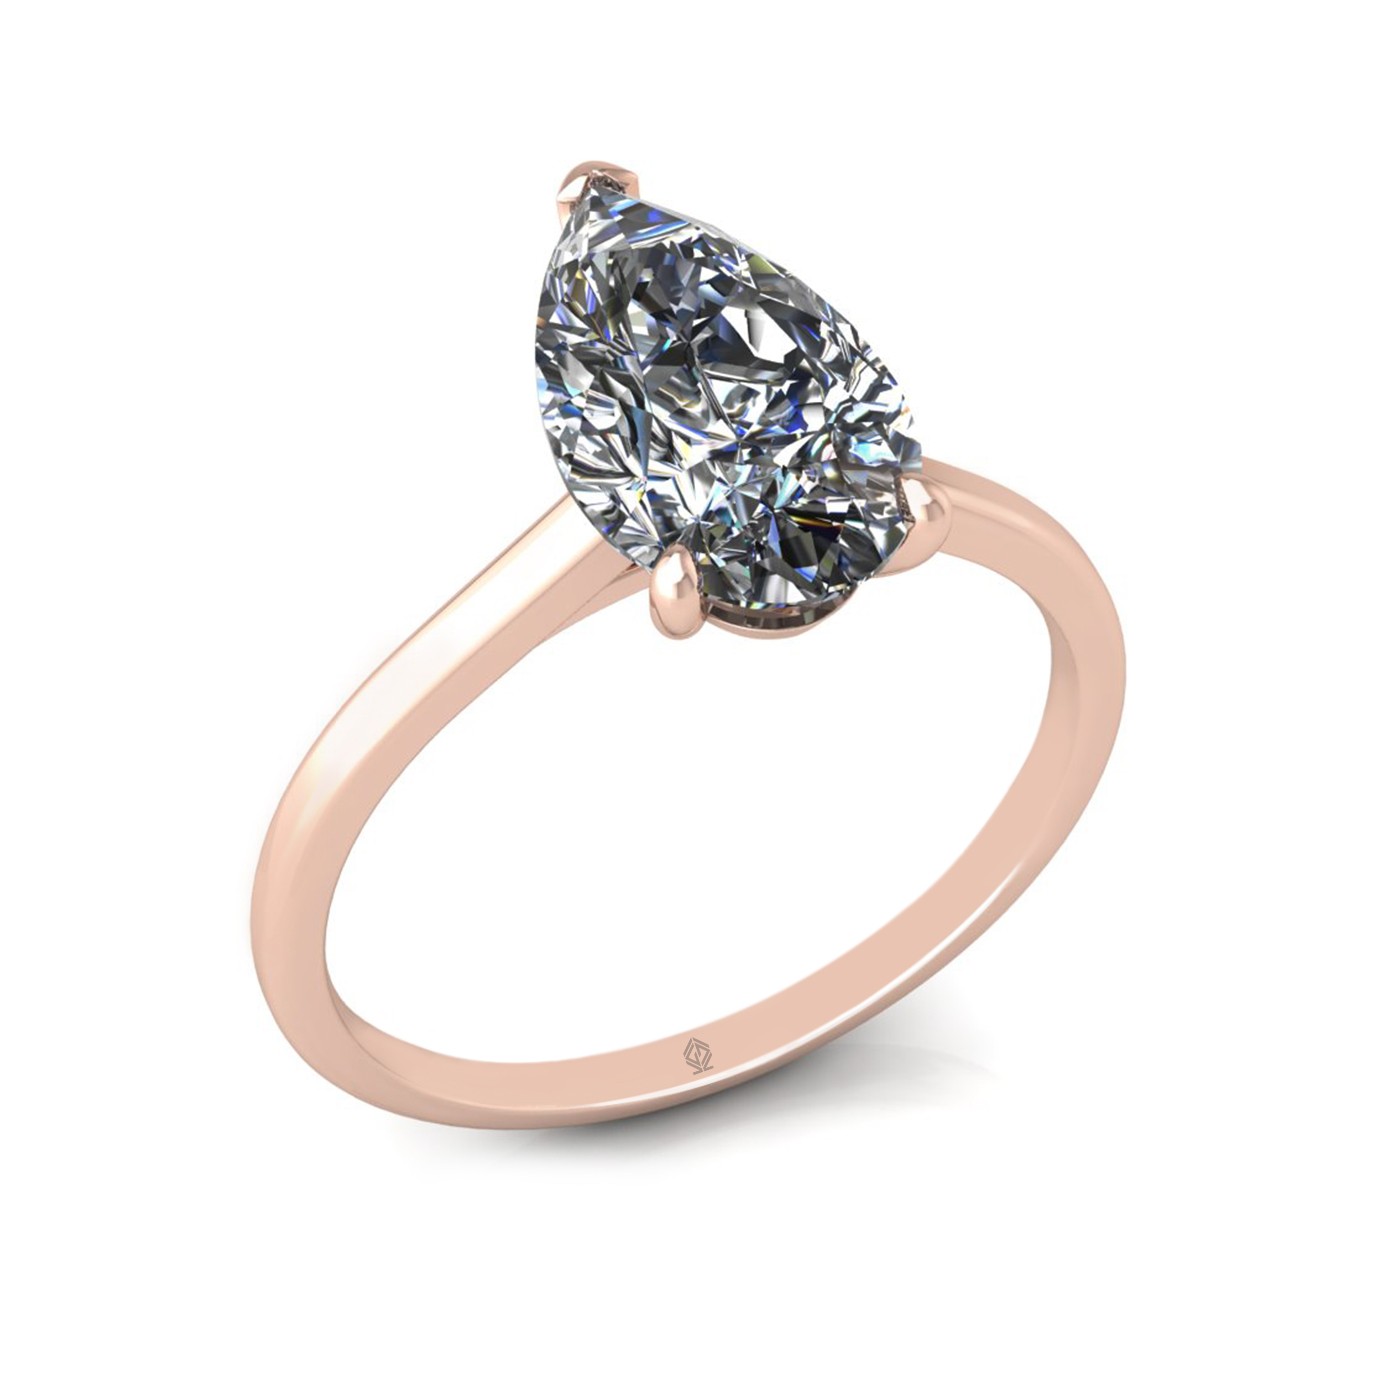 18k rose gold  2,00 ct 3 prongs solitaire pear cut diamond engagement ring with whisper thin band